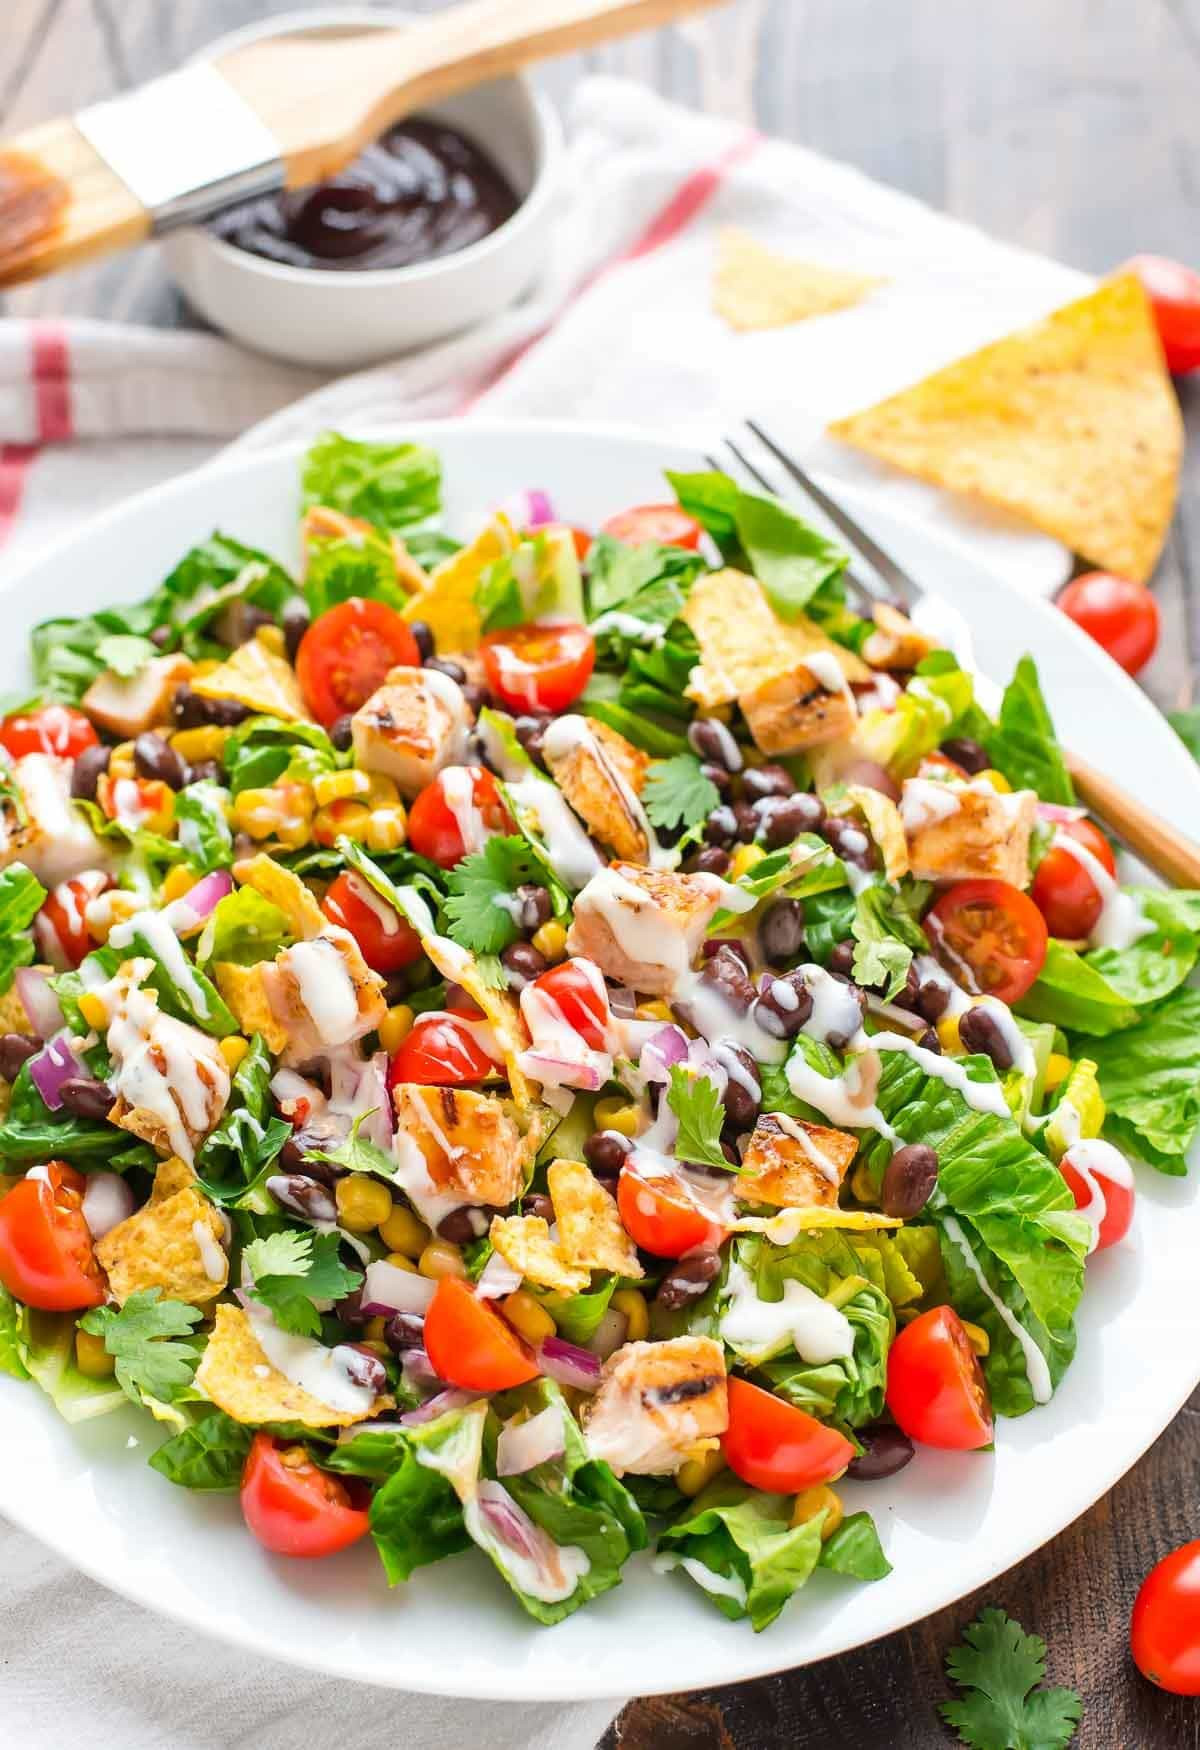 Recipes For Chicken Salad
 BBQ Chicken Salad with Creamy Ranch